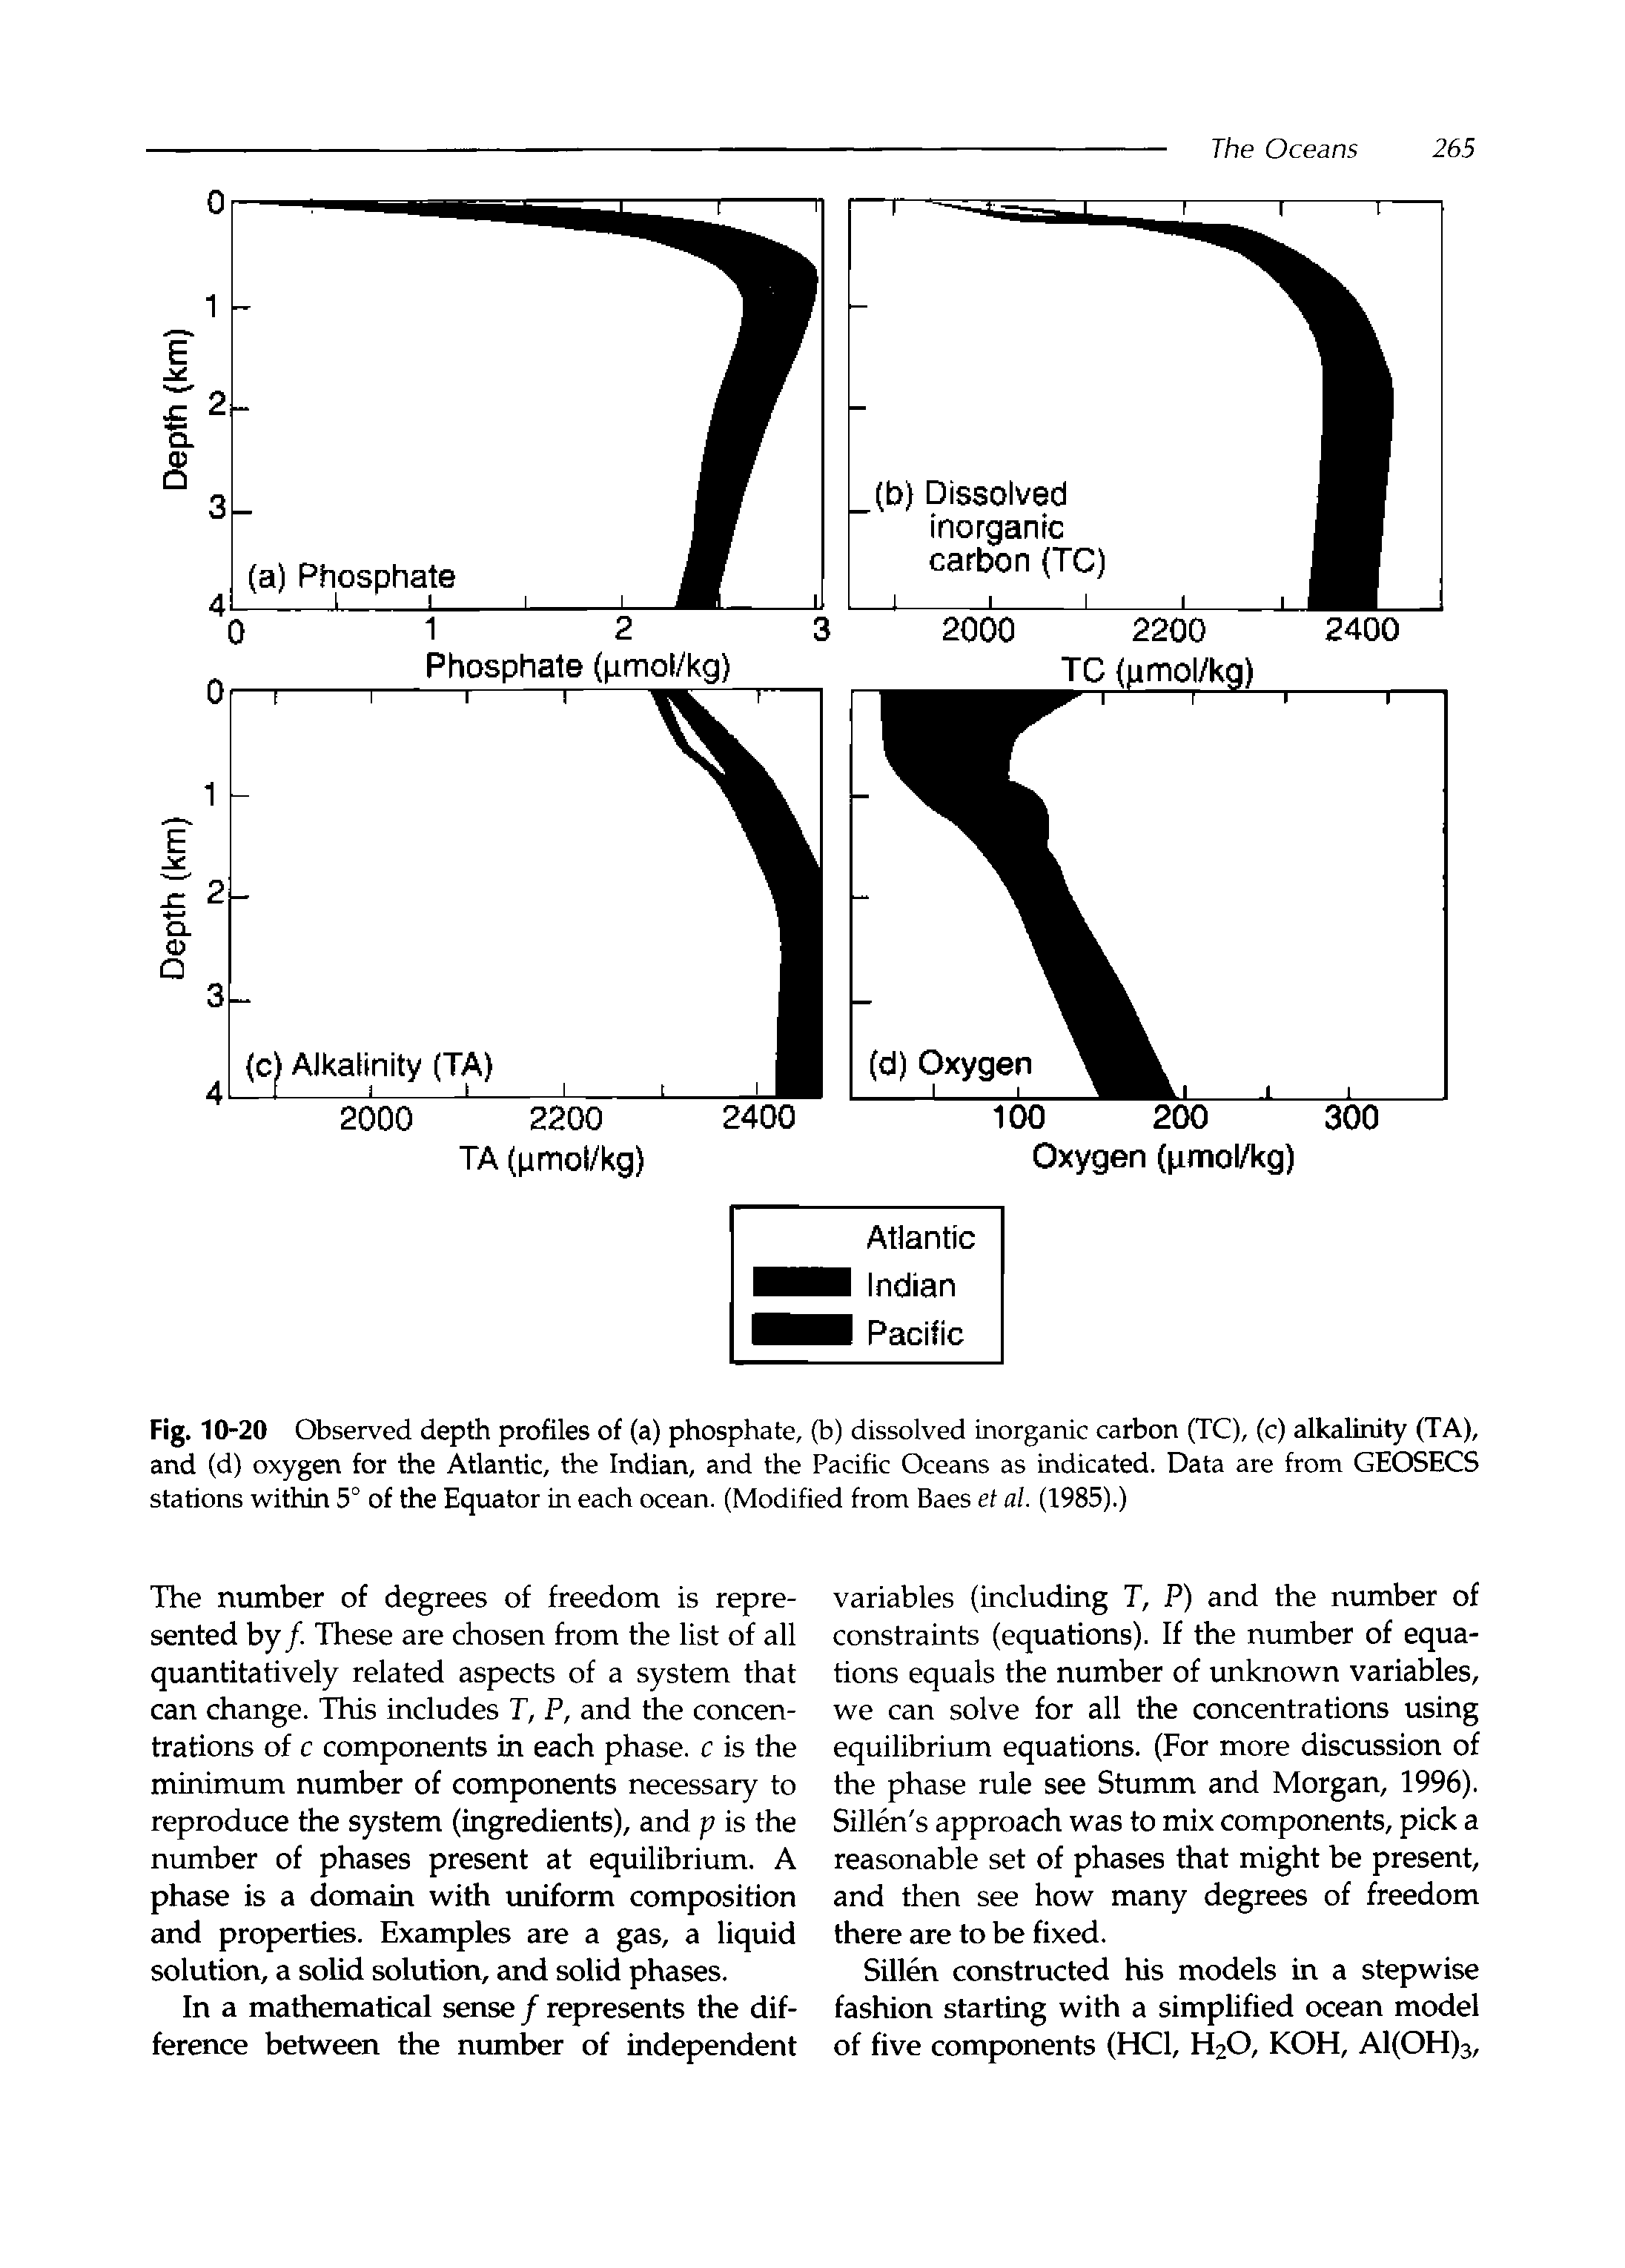 Fig. 10-20 Observed depth profiles of (a) phosphate, (b) dissolved inorganic carbon (TC), (c) alkalinity (TA), and (d) oxygen for the Atlantic, the Indian, and the Pacific Oceans as indicated. Data are from GEOSECS stations within 5° of the Equator in each ocean. (Modified from Baes et al. (1985).)...